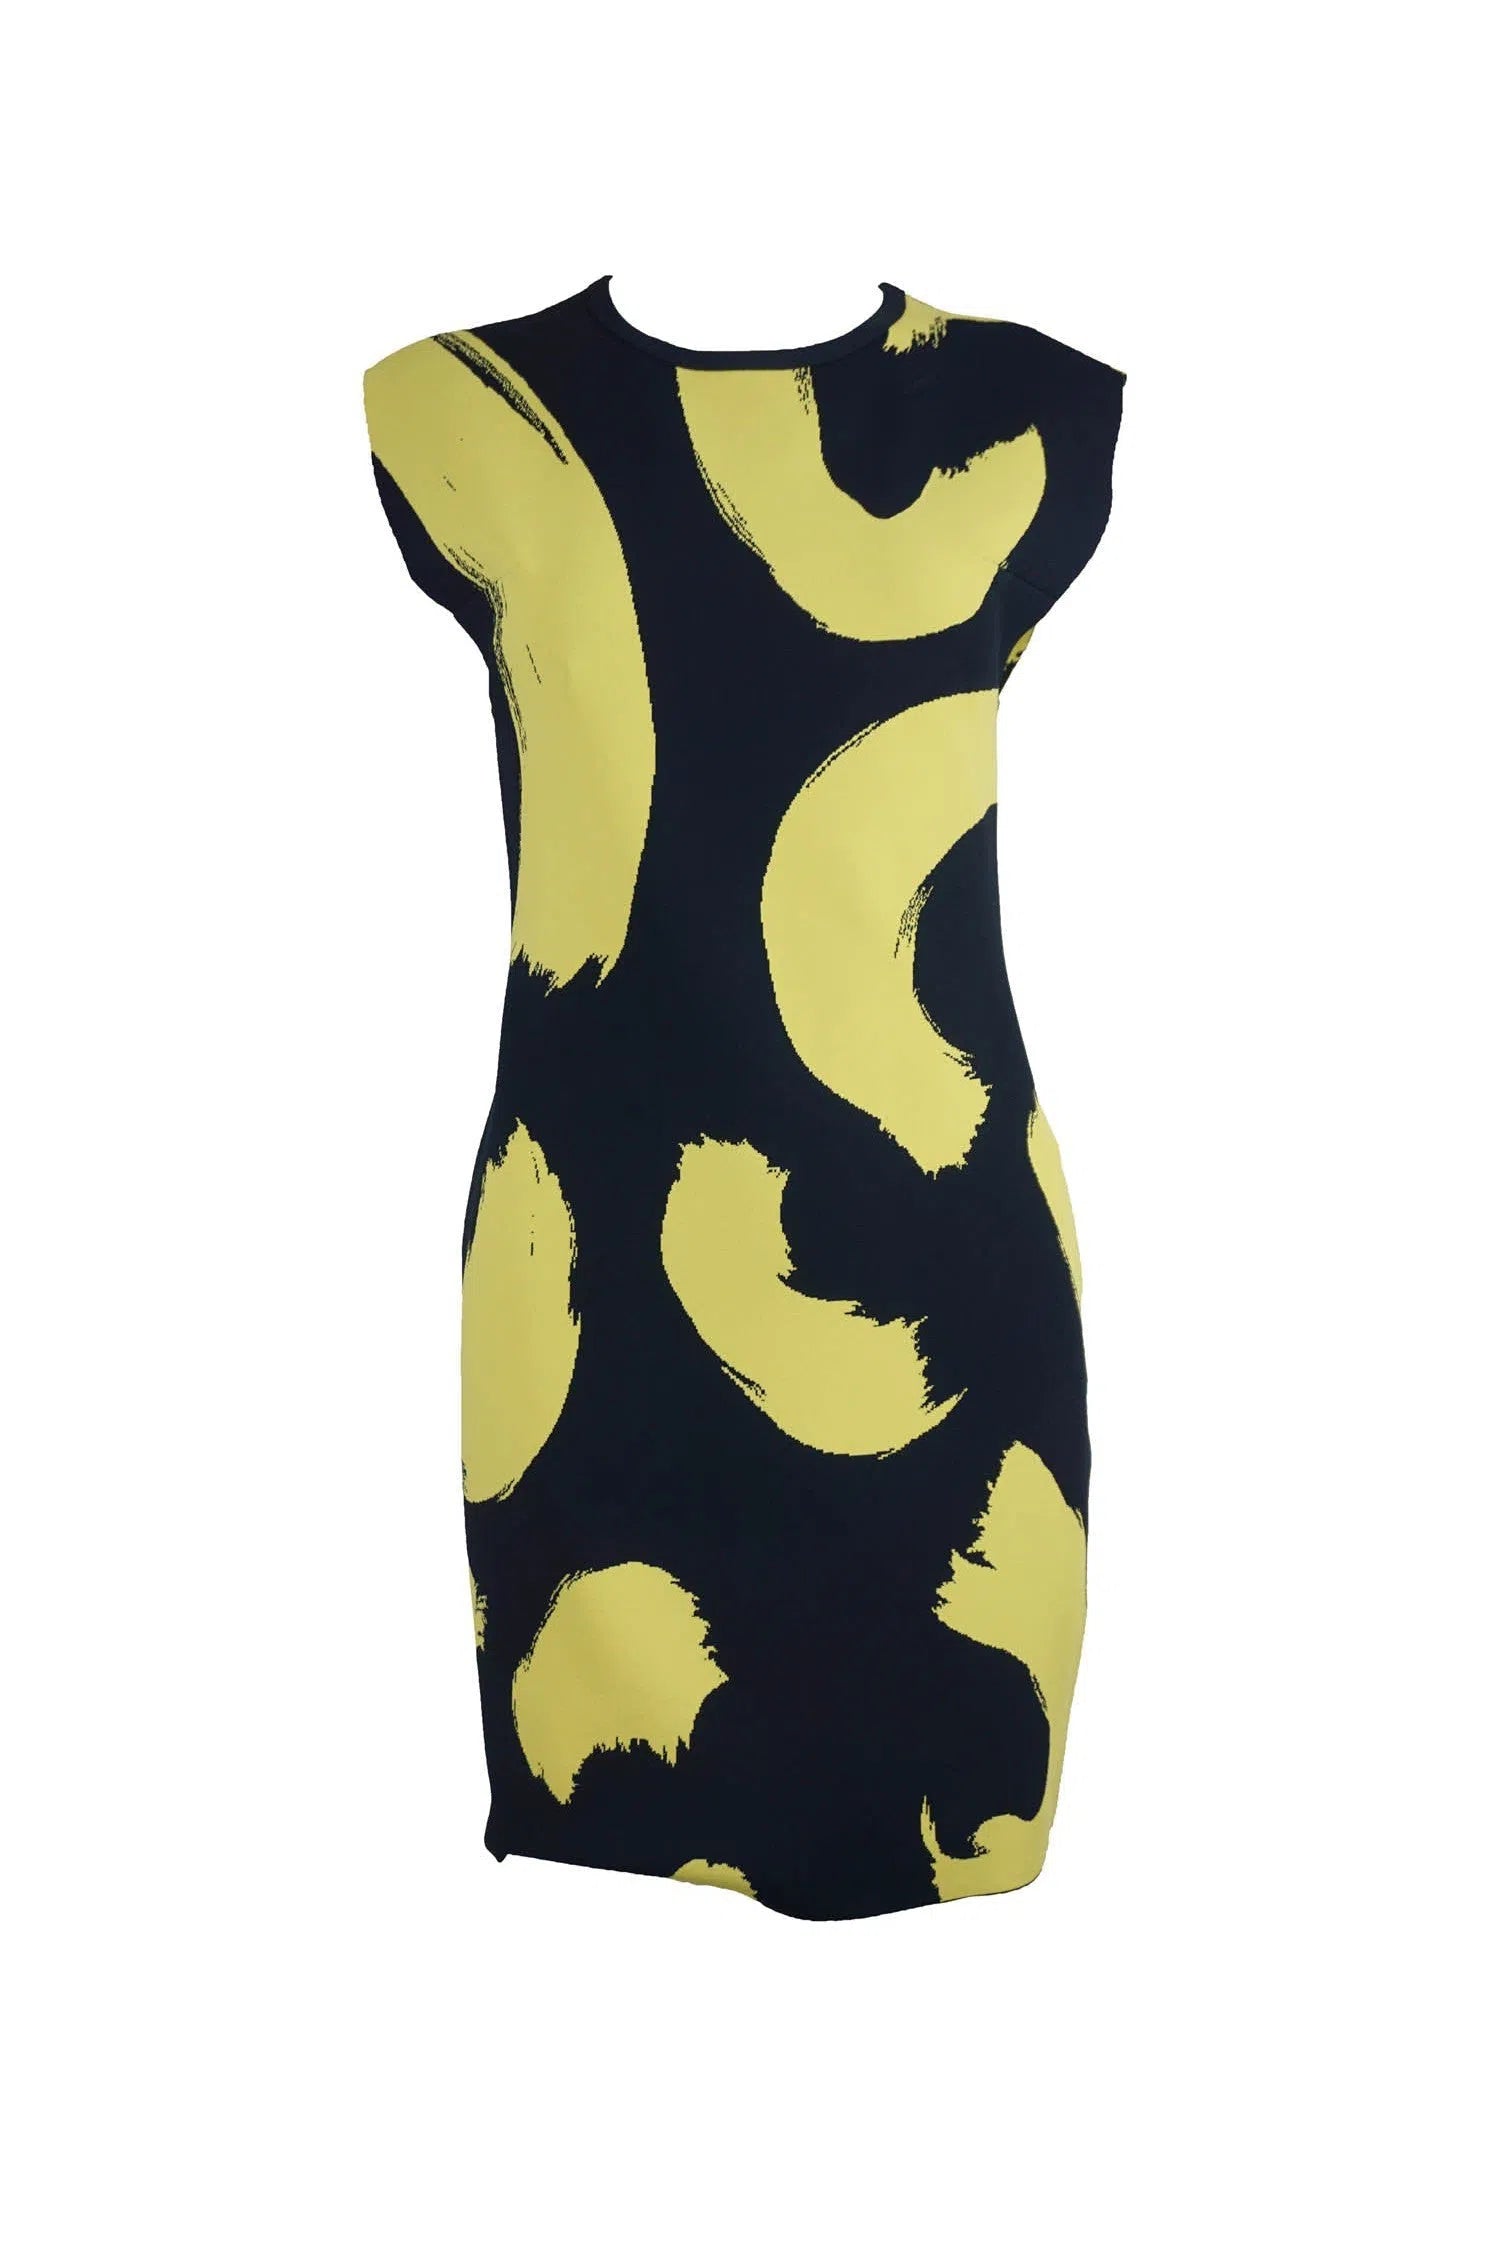 Celine by Phoebe Philo Yellow Brushstroke Dress 2014 Spring - Foxy Couture Carmel